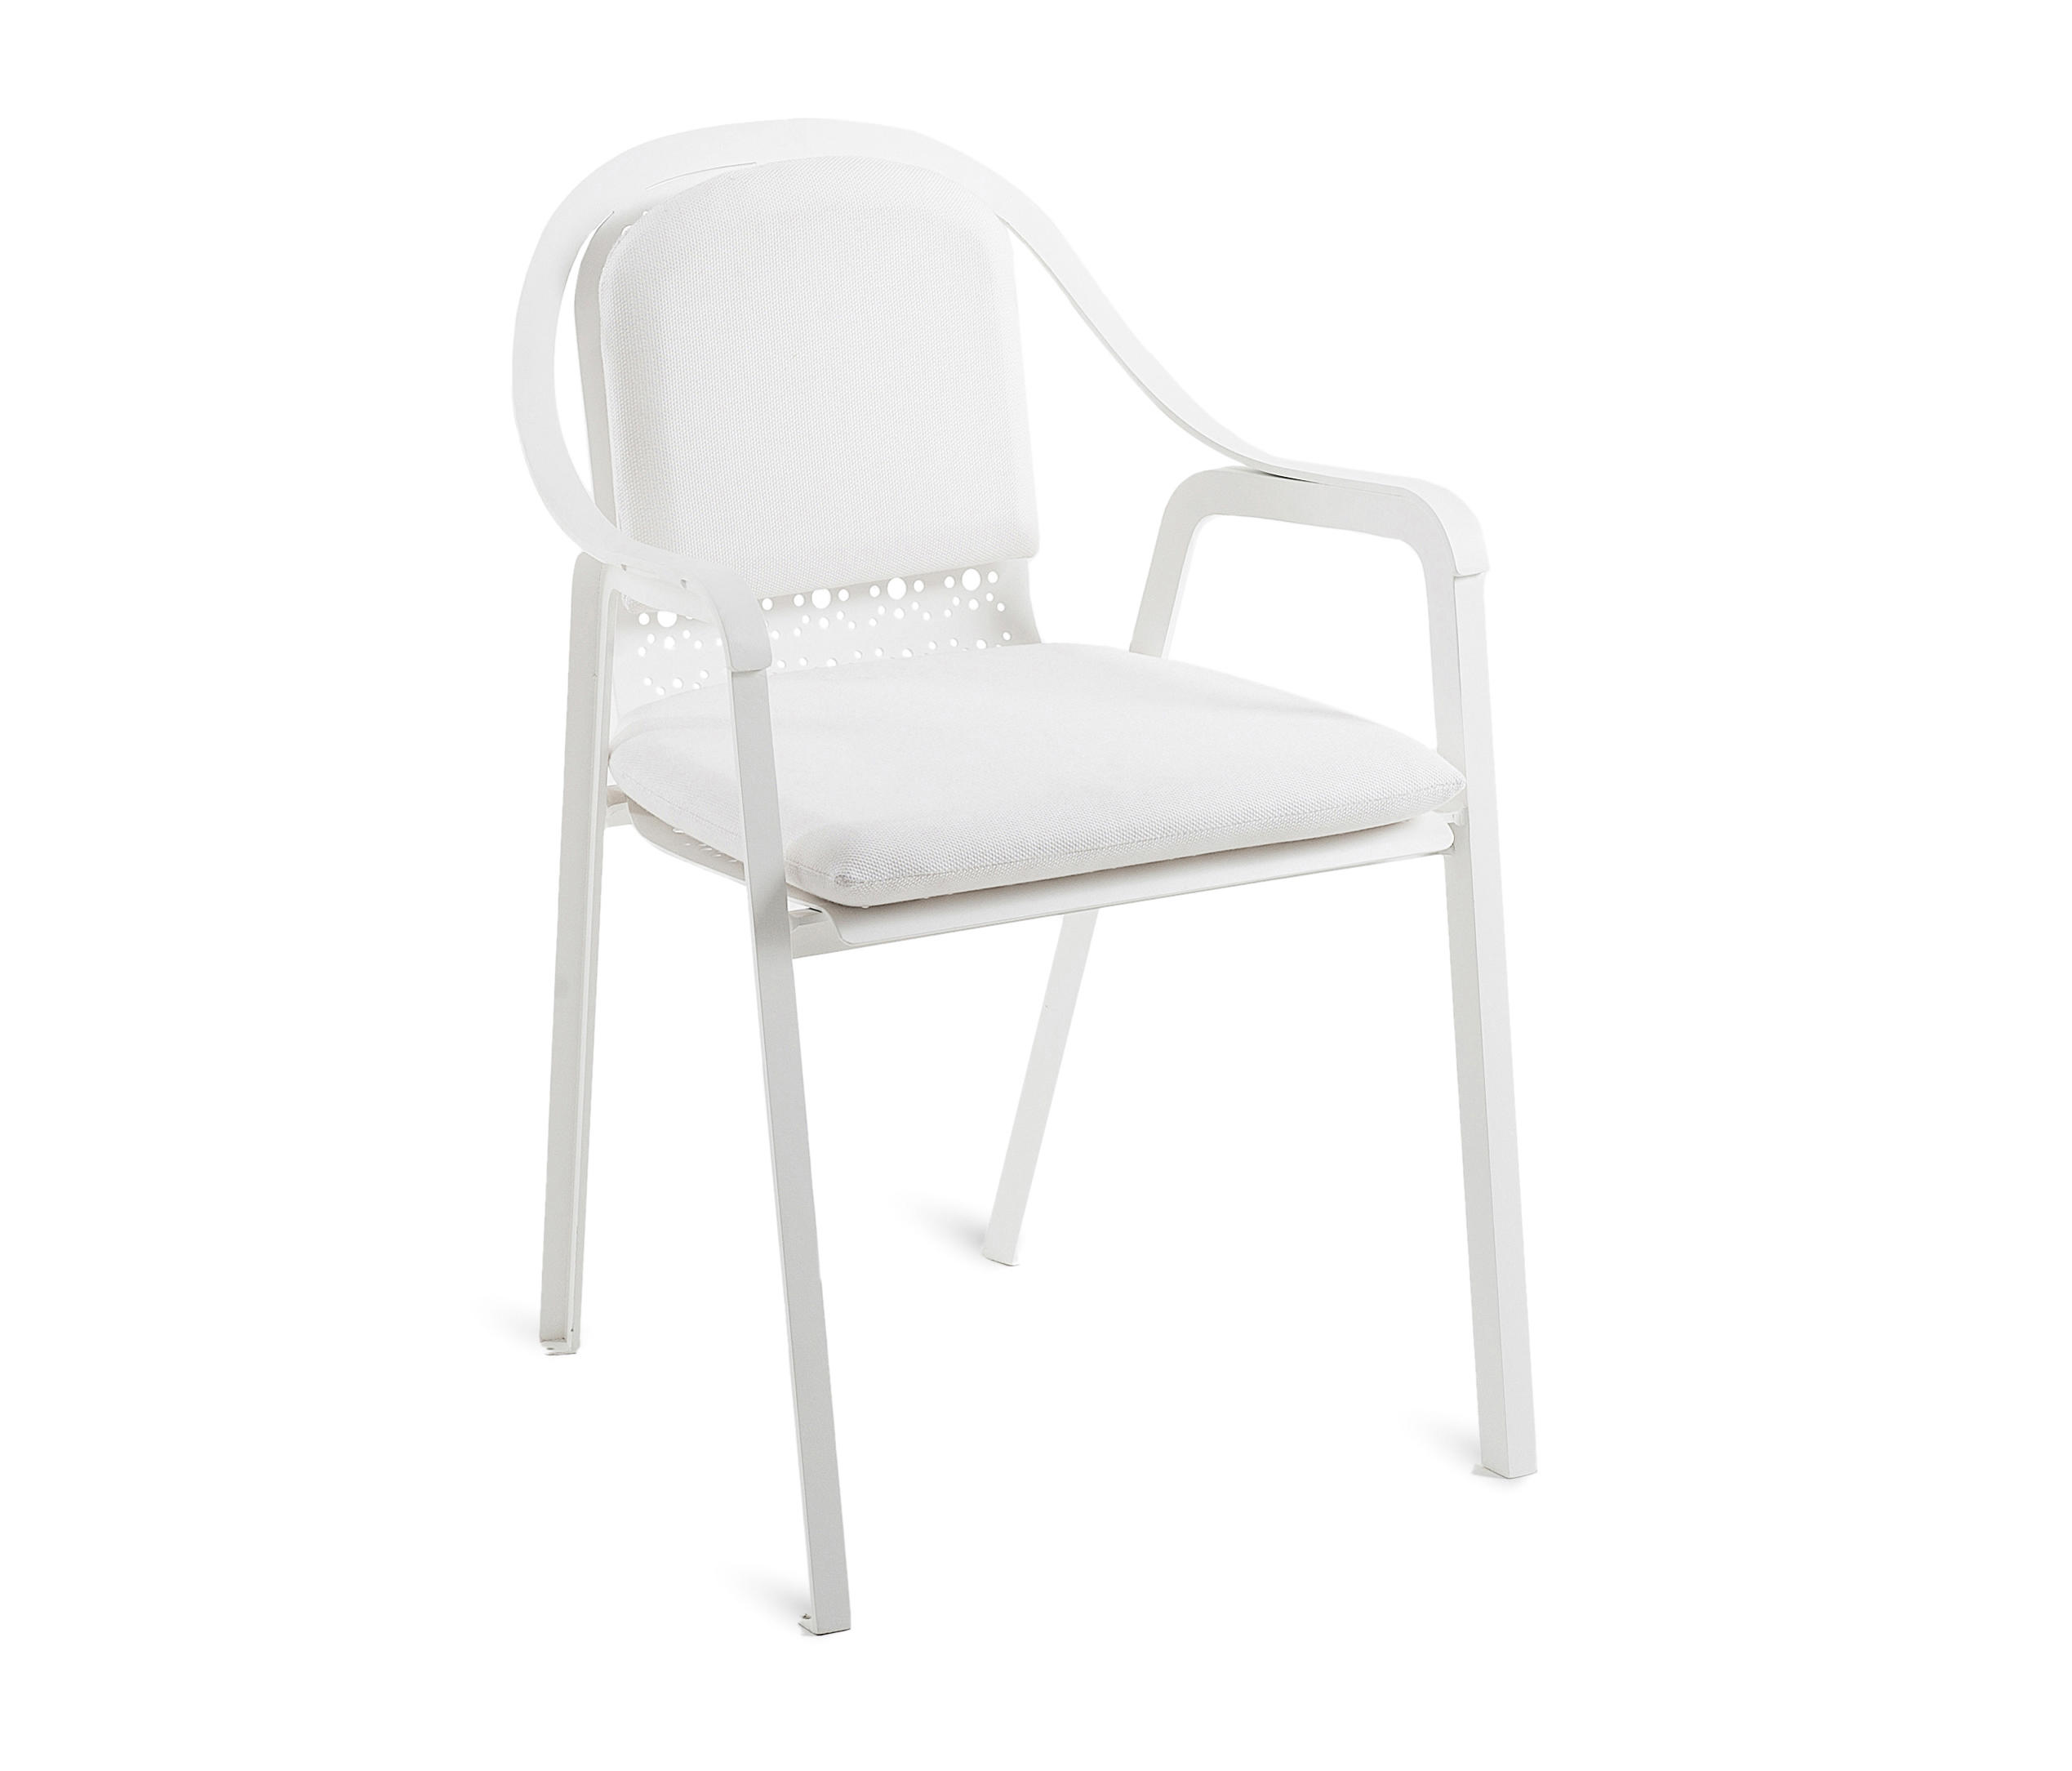 TLINE - Chairs from Unopiù | Architonic